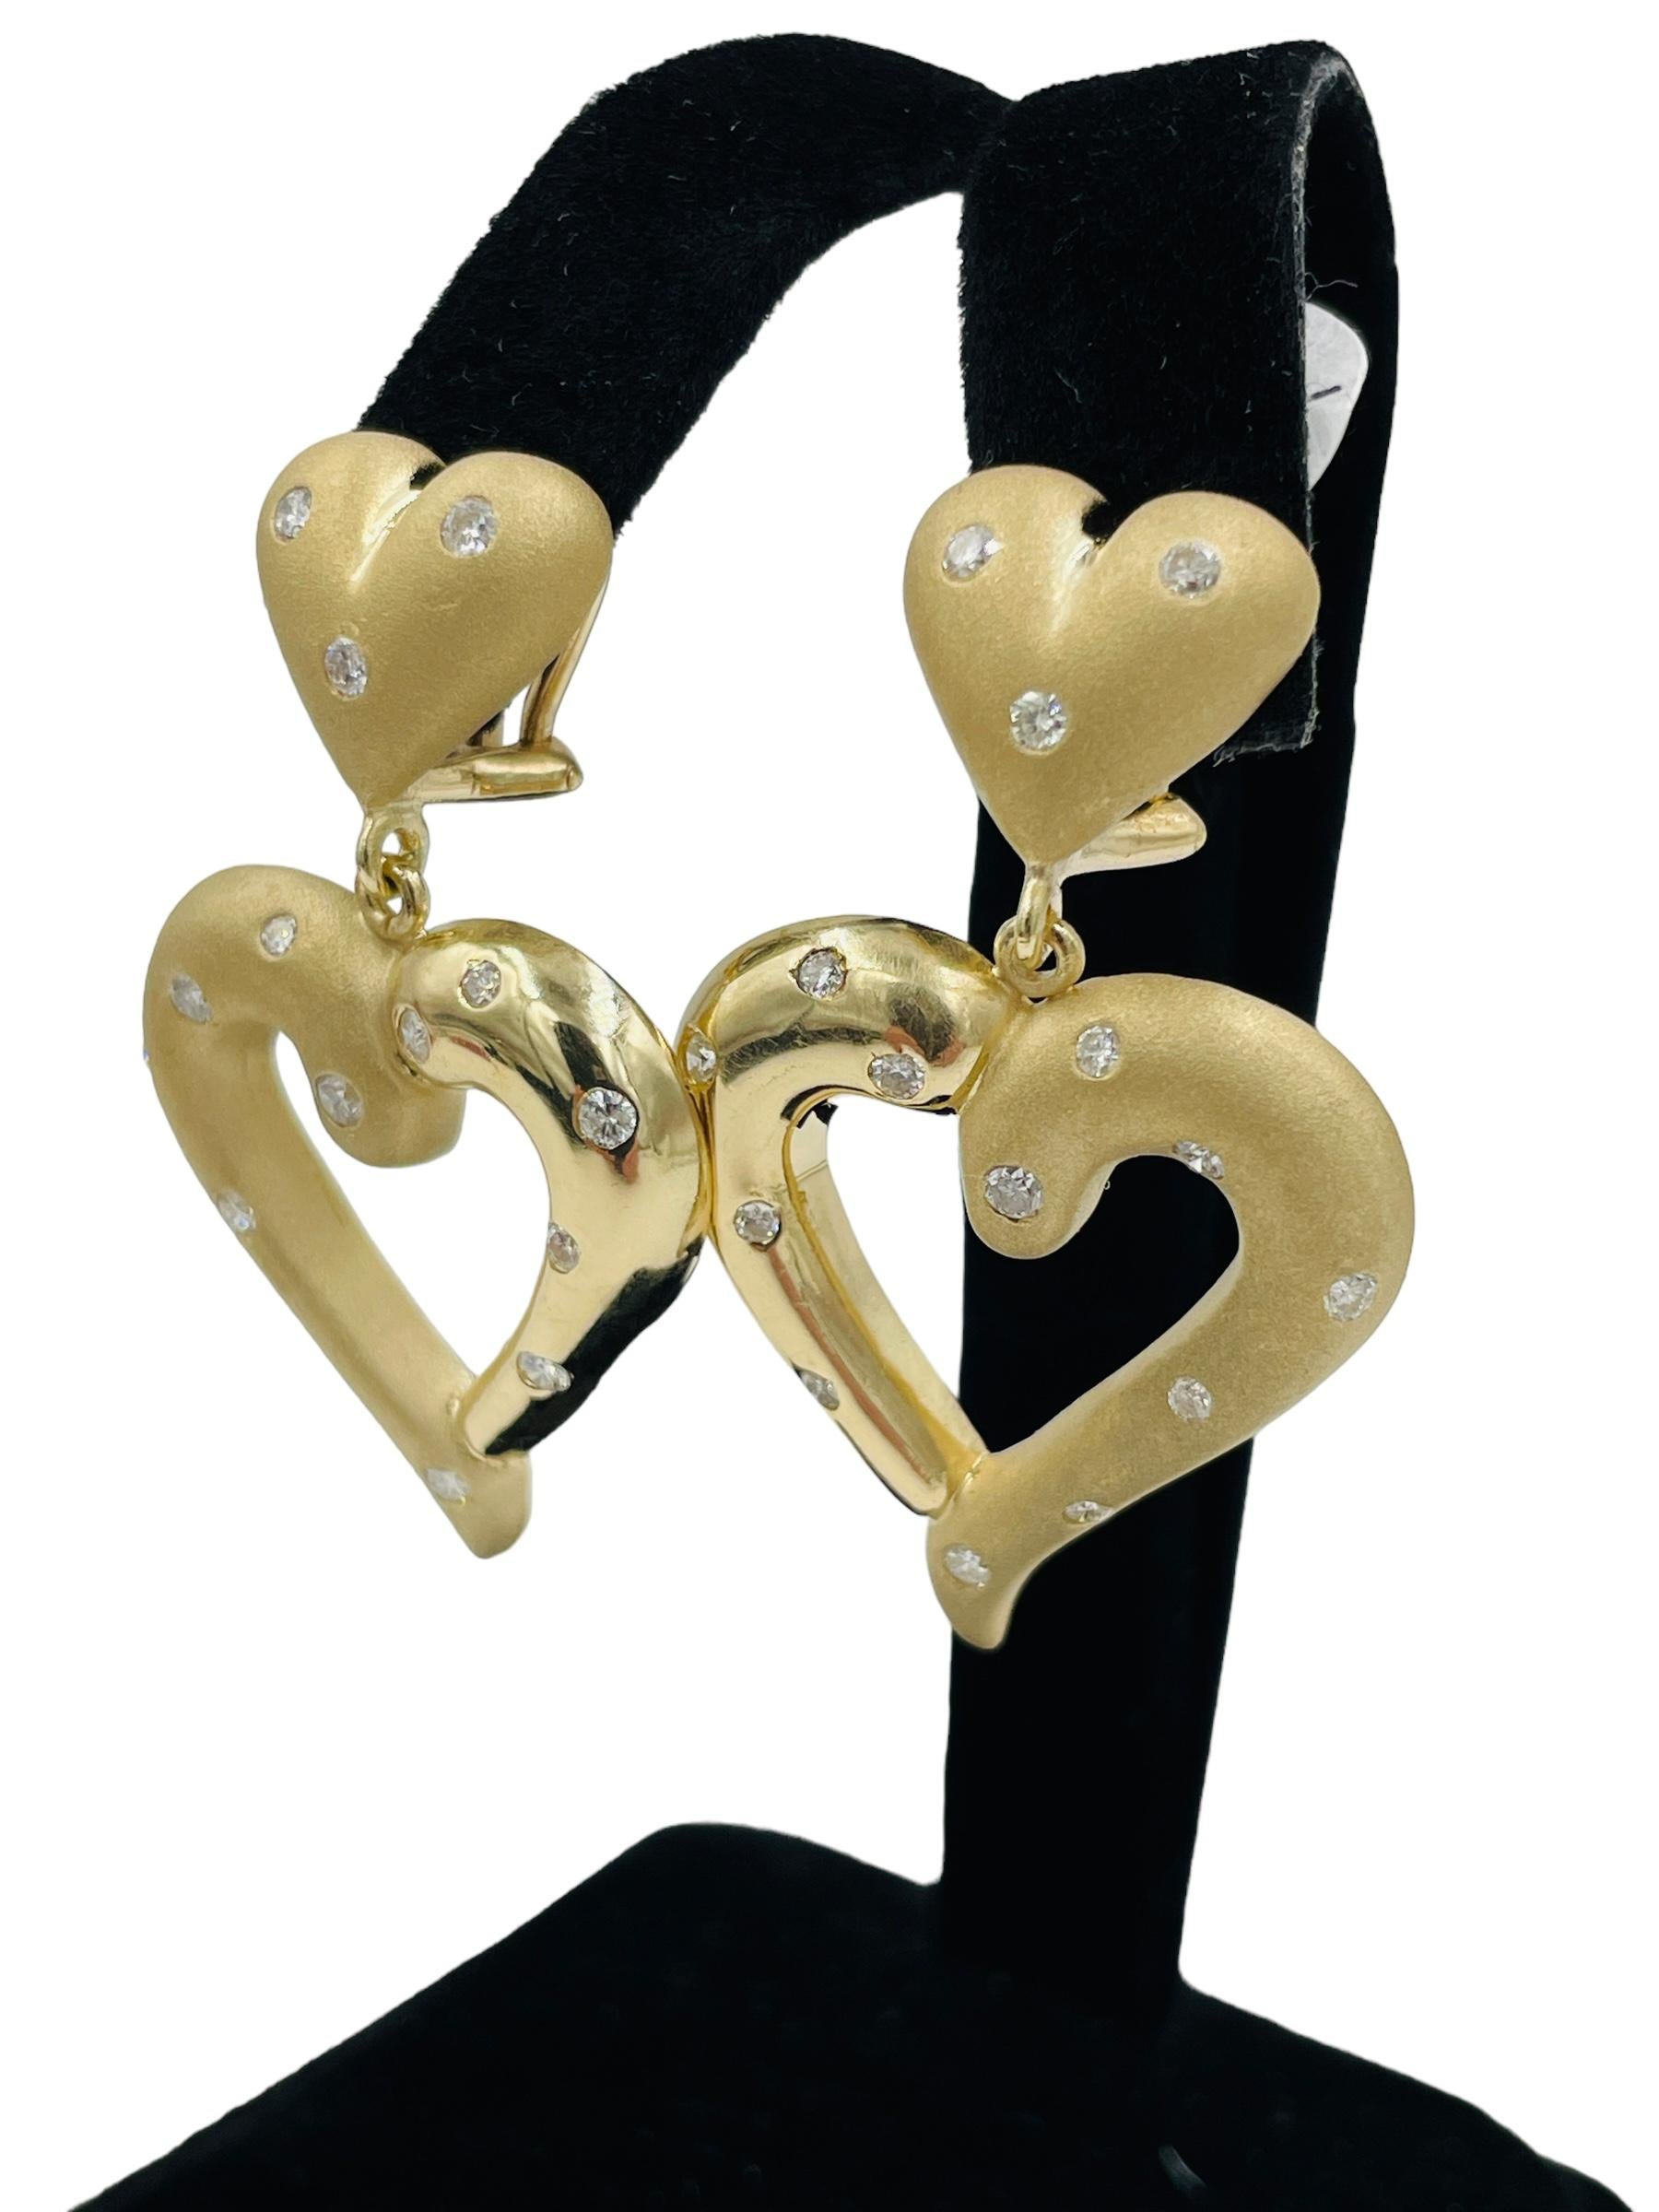 Heart Shaped Dangling 14k Yellow Gold Diamond Earrings

These heart-shaped dangling yellow gold diamond earrings are a timeless and elegant accessory that every woman should own.  The matt and shiny surfaces add exquisite detail to these earrings